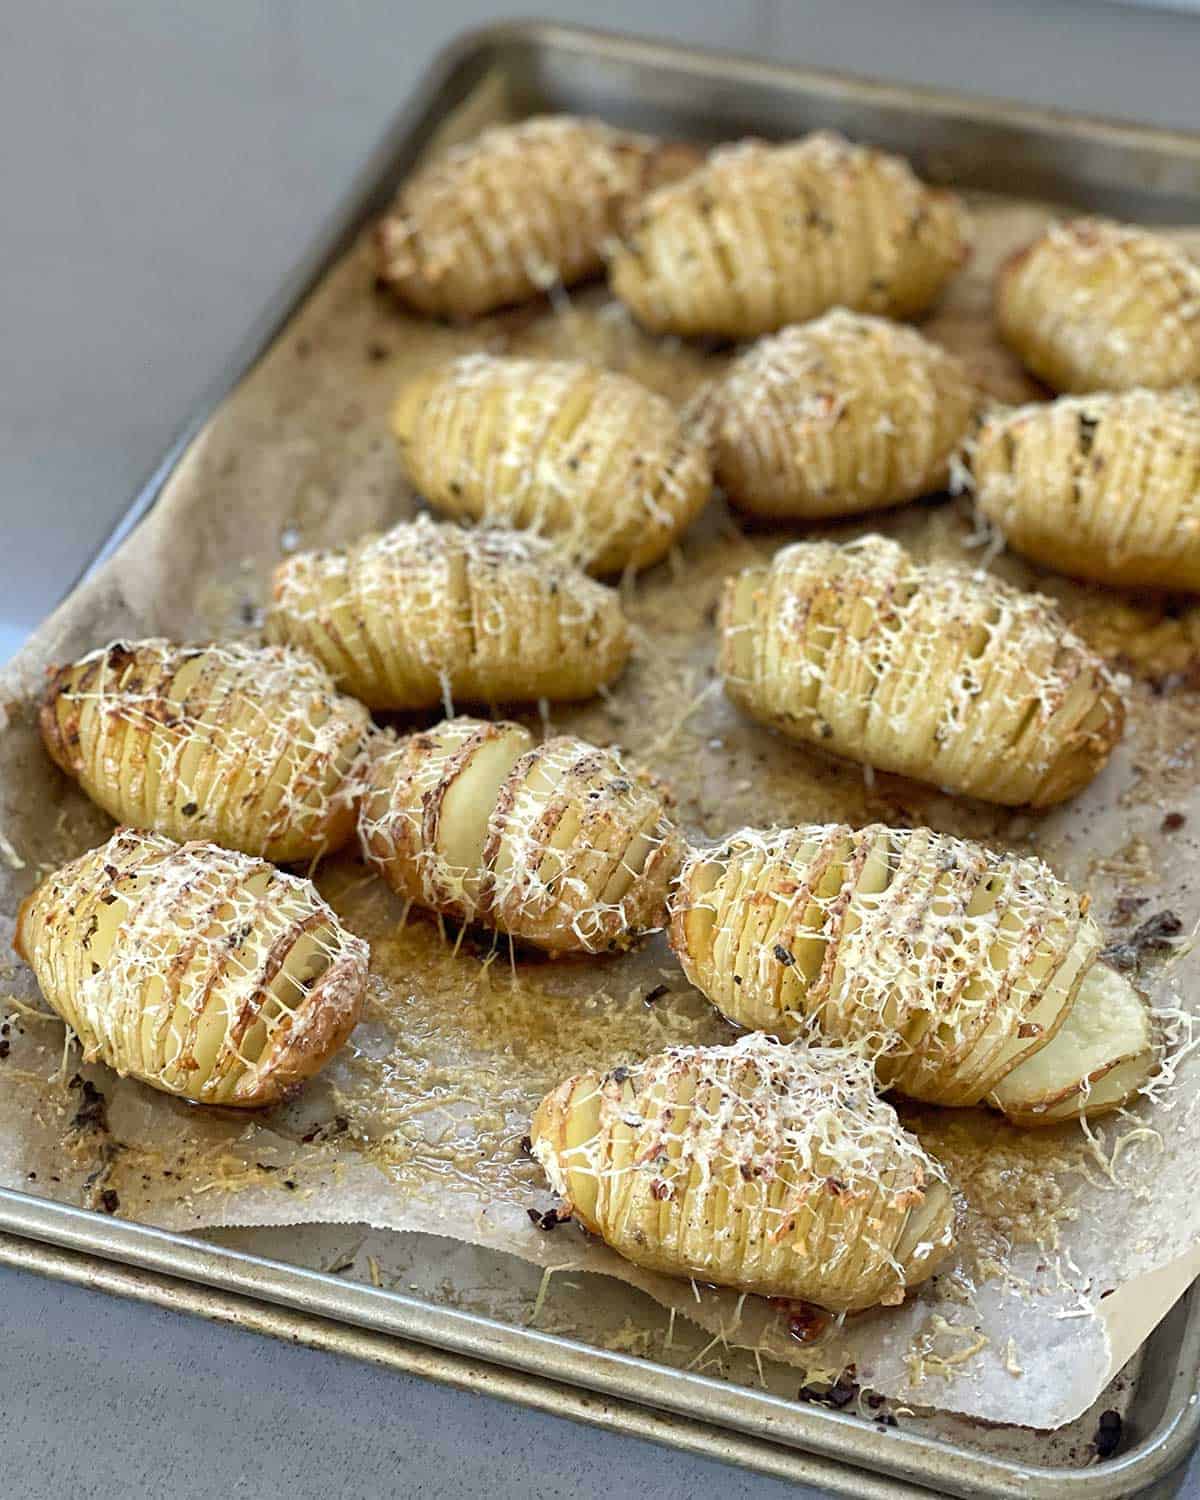 Cooked Hasselback Potatoes sitting on a lined baking tray.